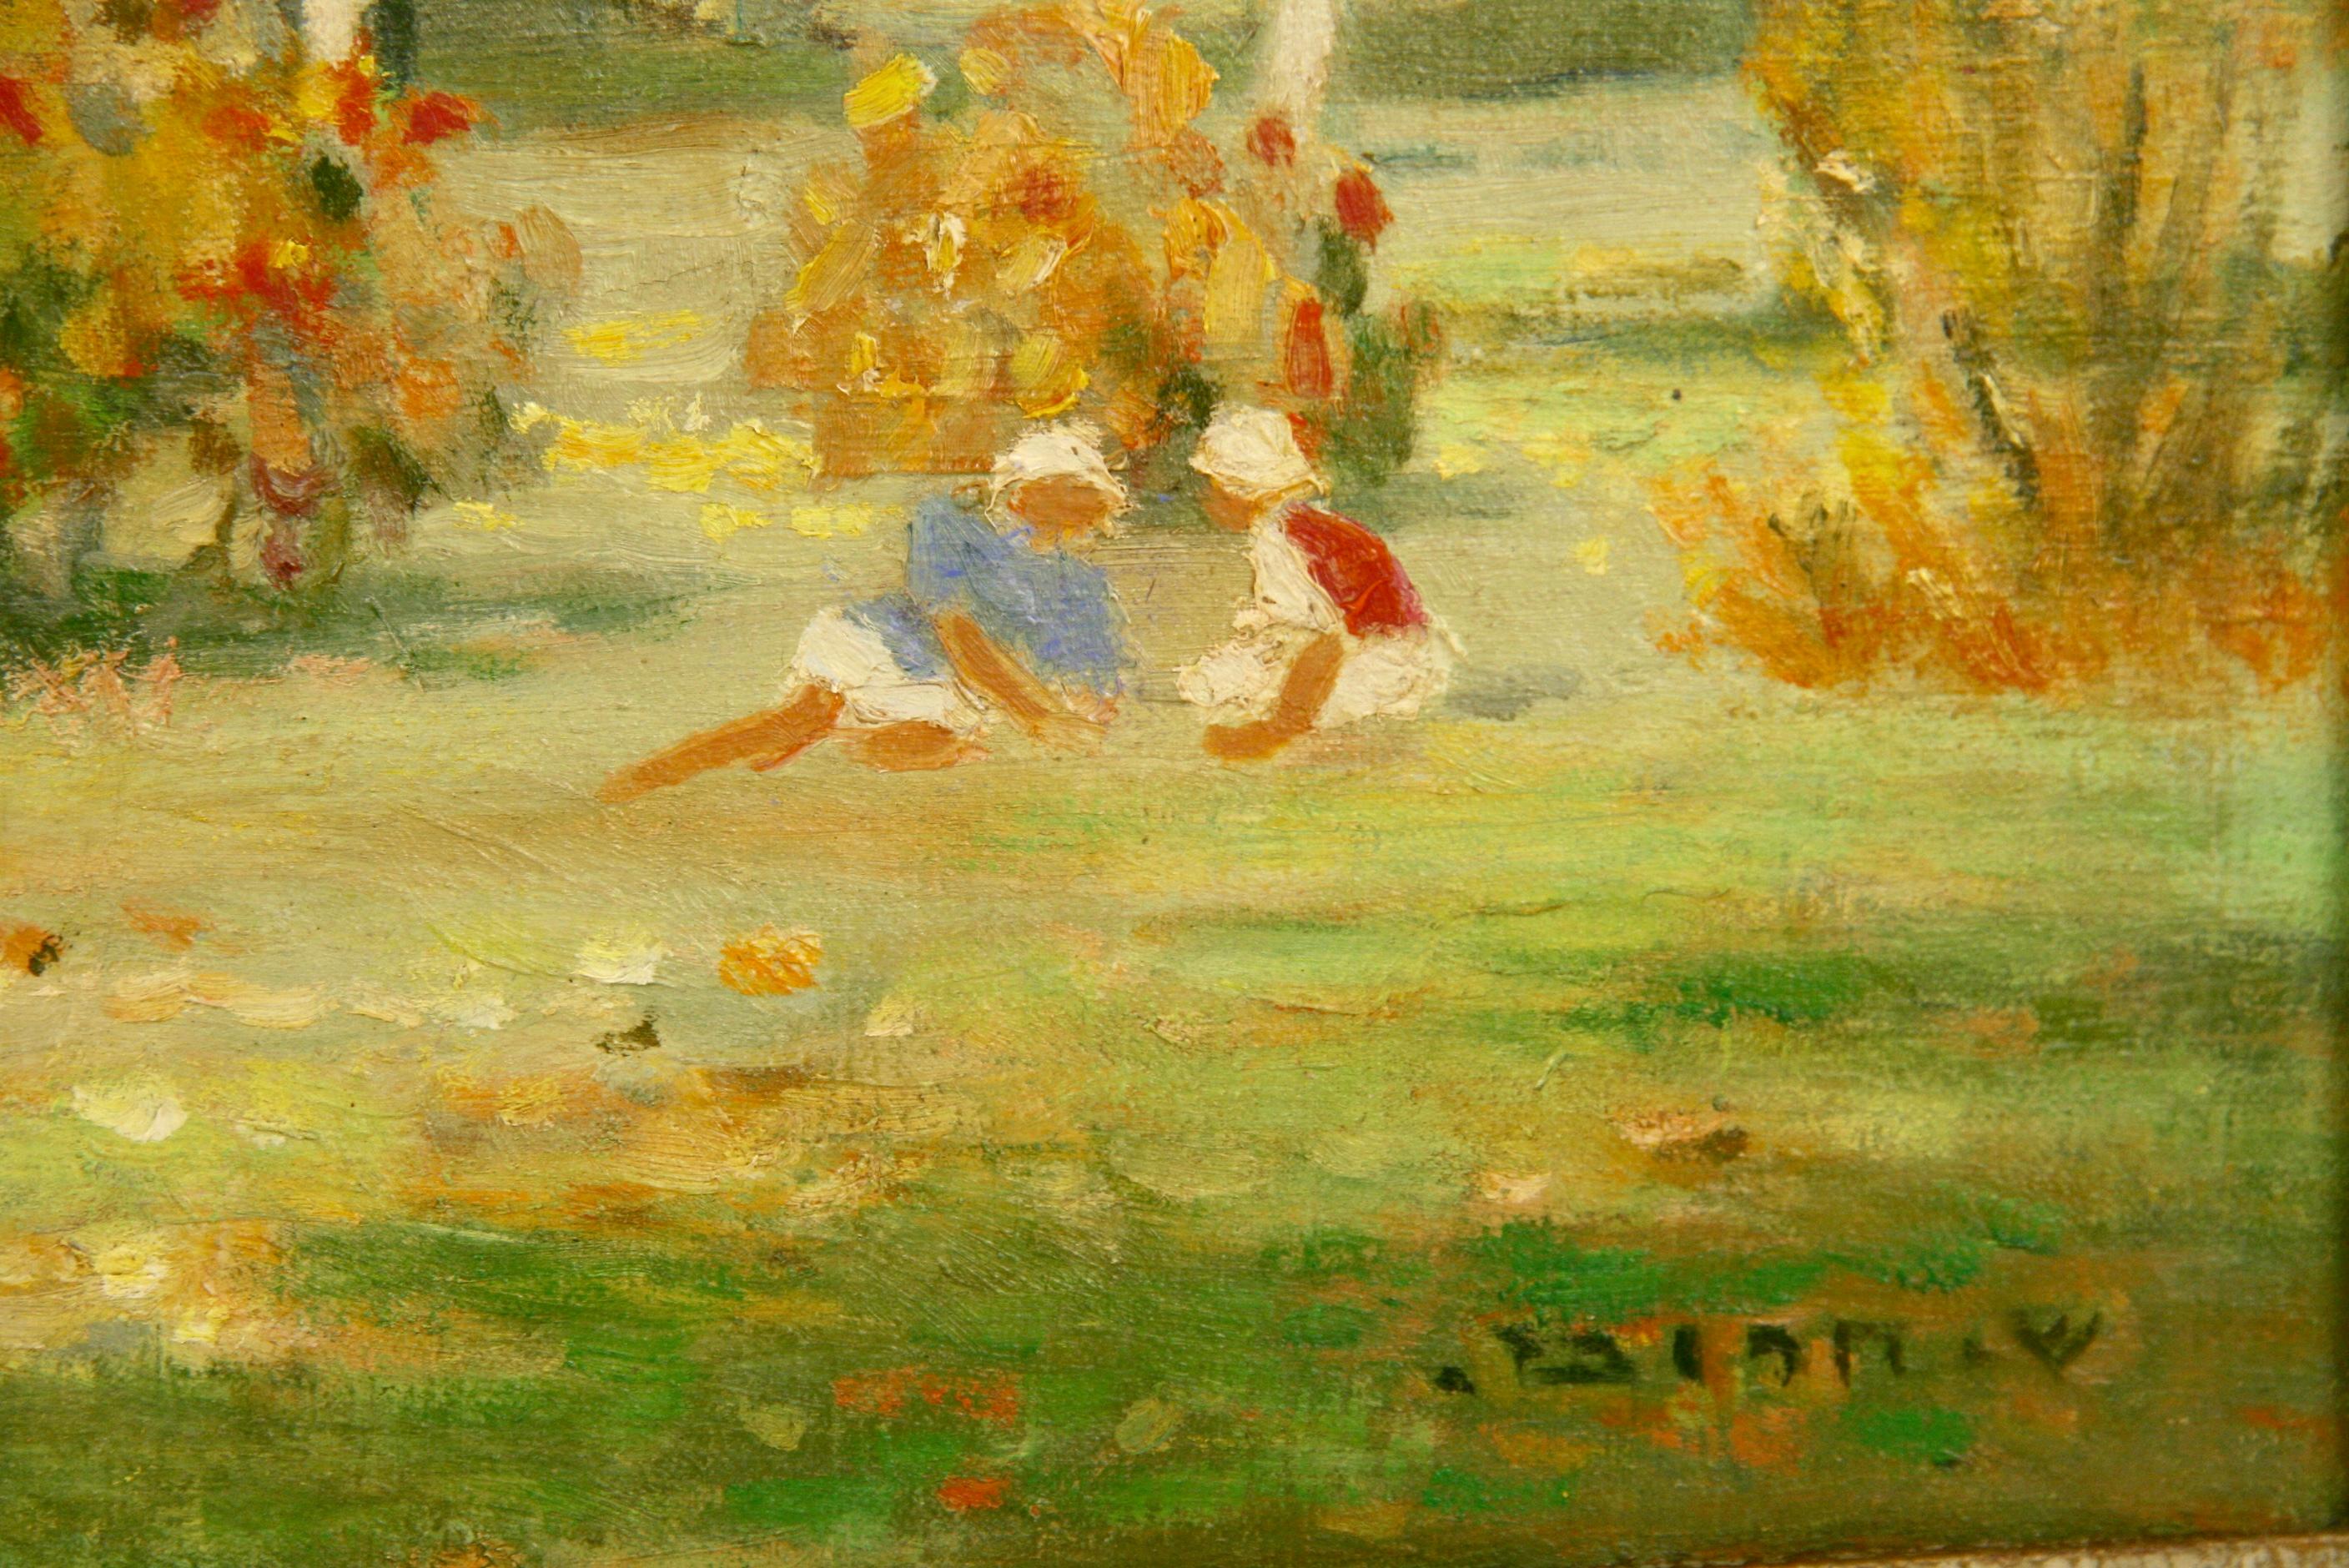 Antique Impressionistic Landscape Oil Painting  with Children Circa 1940's For Sale 1